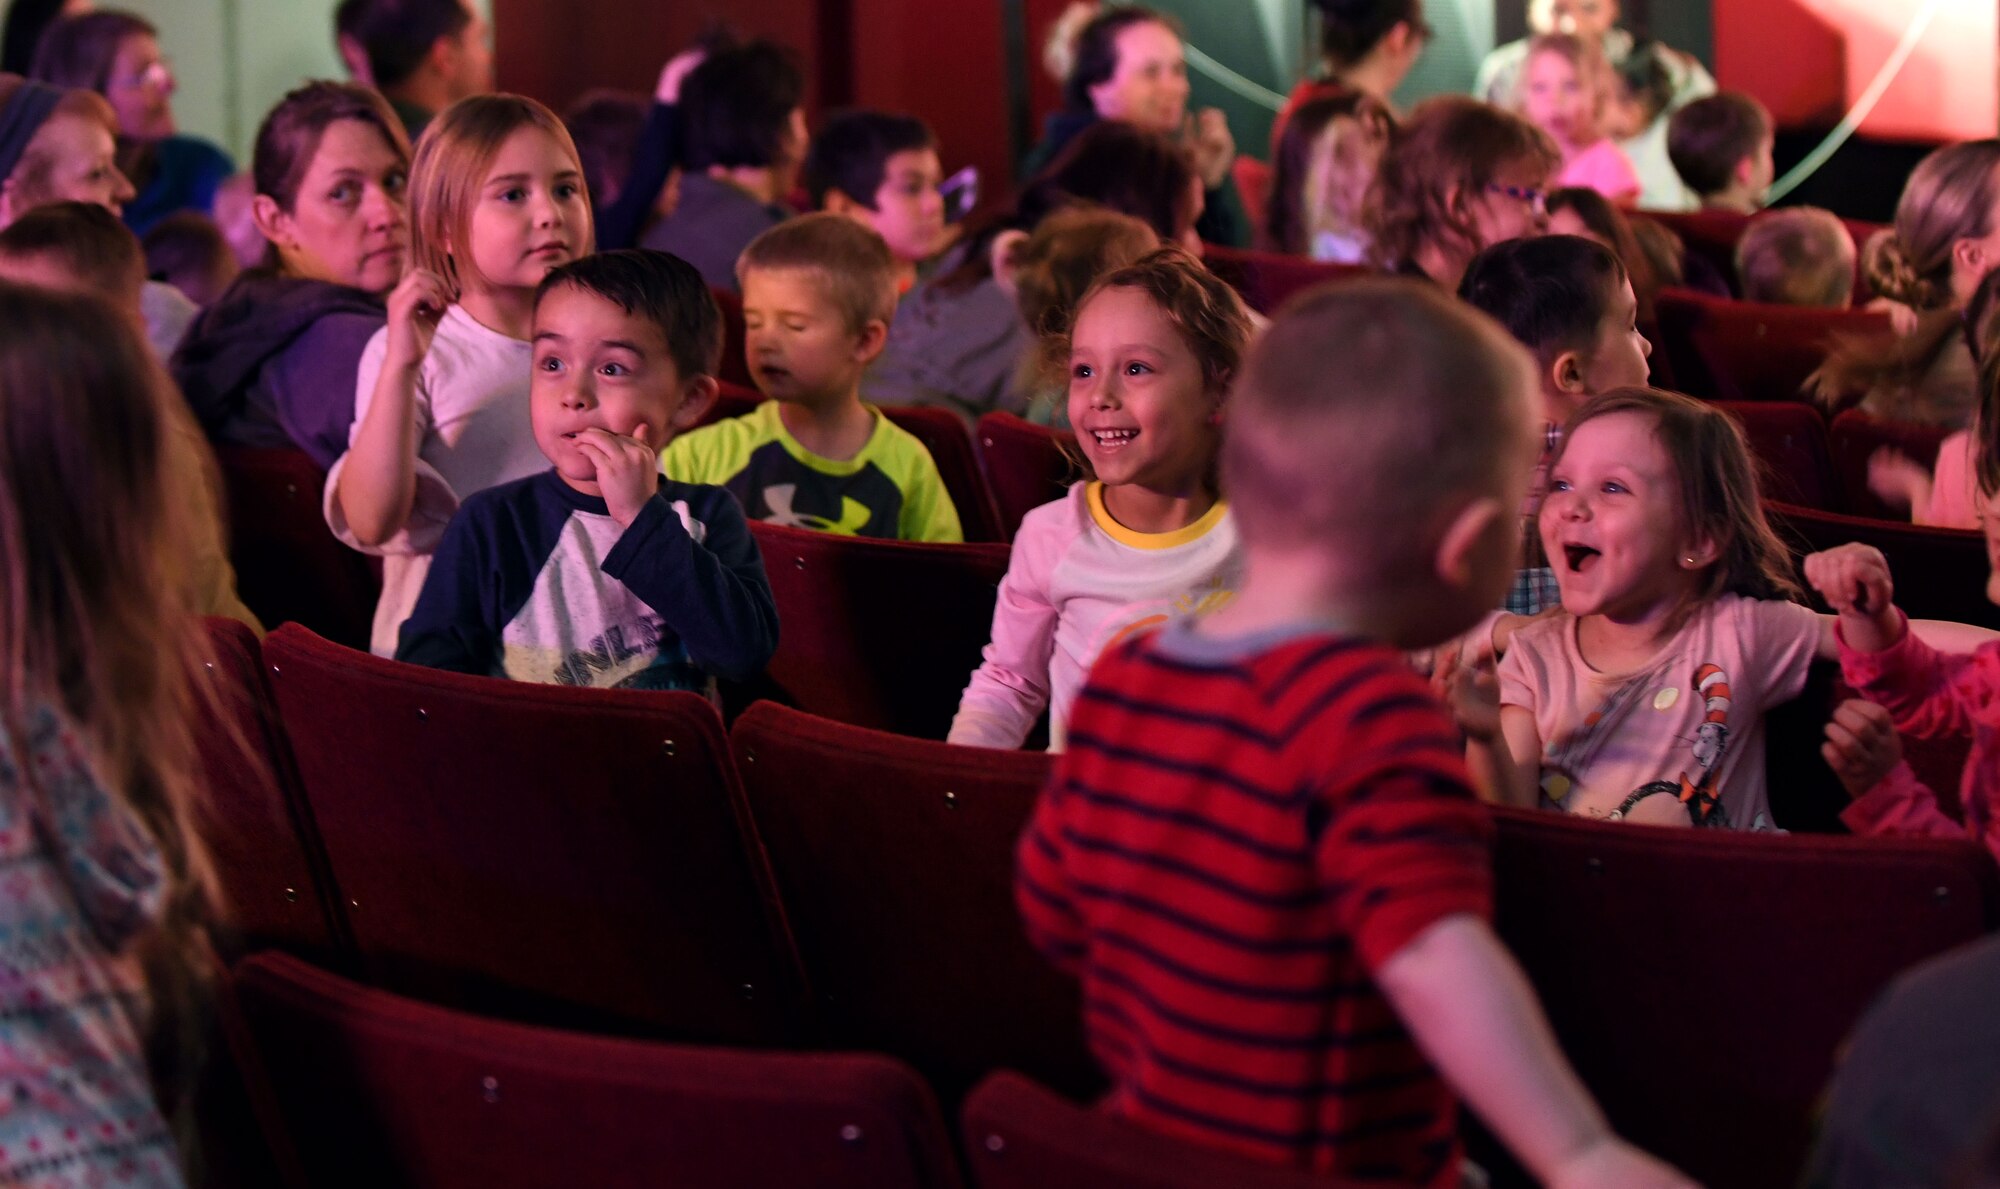 Children cheer during the finale of the Sesame Street Live performance held at the base theater on Ellsworth Air Force Base, S.D., March 28, 2019. Families were able to get up close and personal with their favorite characters while singing, dancing and learning about the importance of community. (U.S. Air Force photo by Airman 1st Class Christina Bennett)